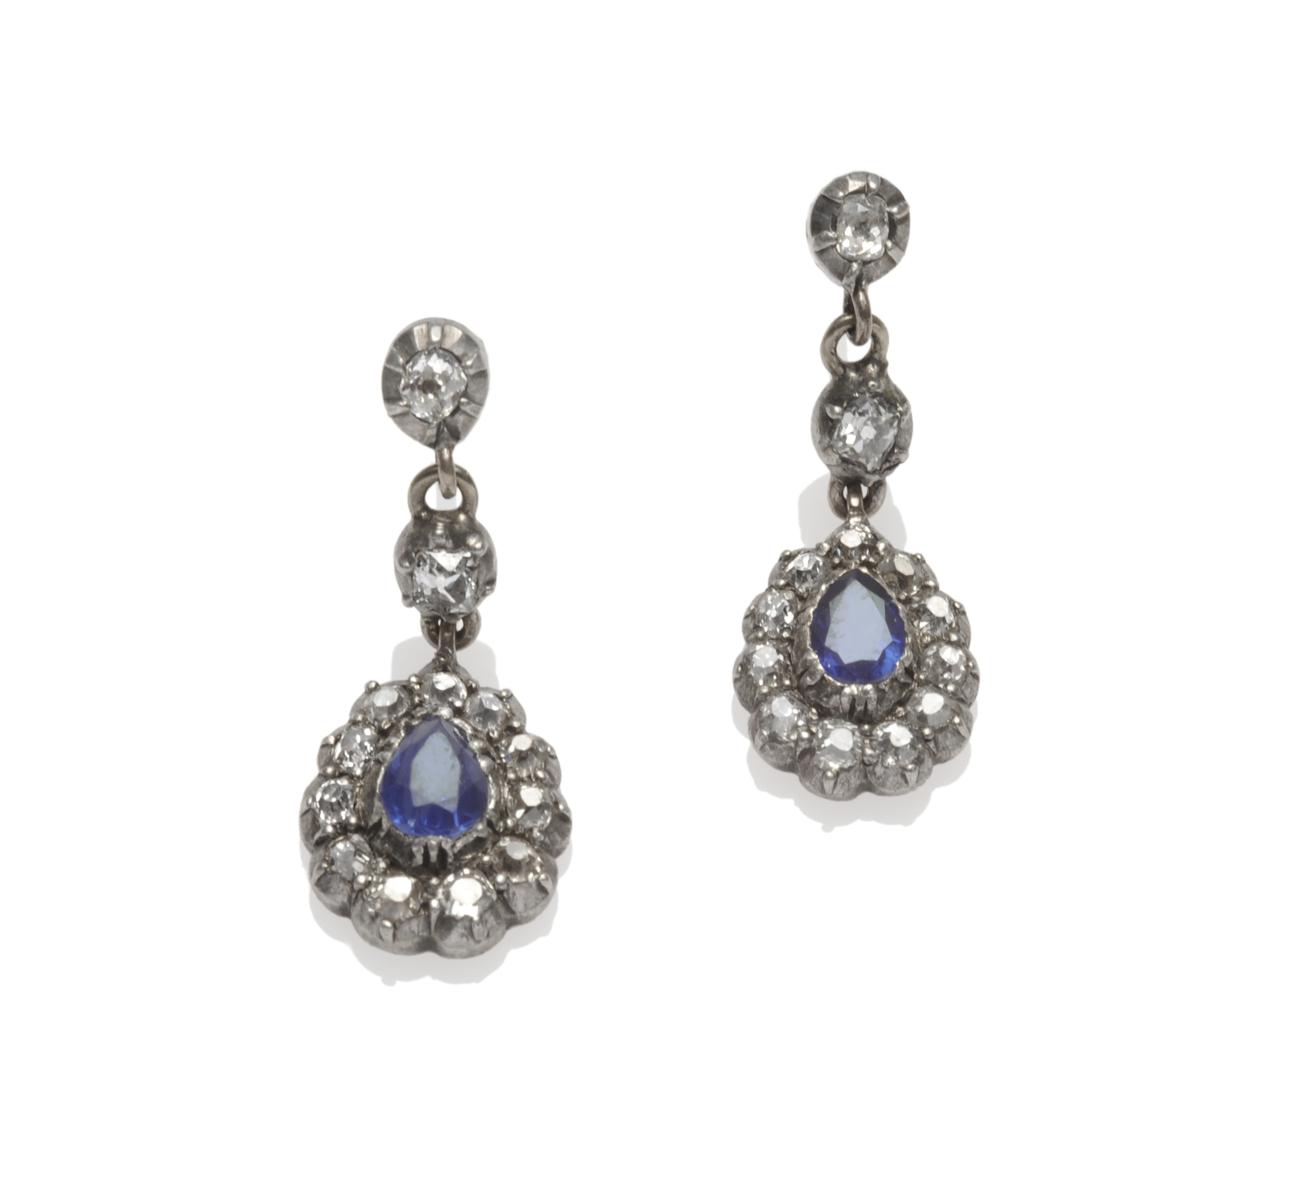 A Pair of Sapphire and Diamond Drop Earrings, circa 1860, two chain linked old cut diamonds suspend